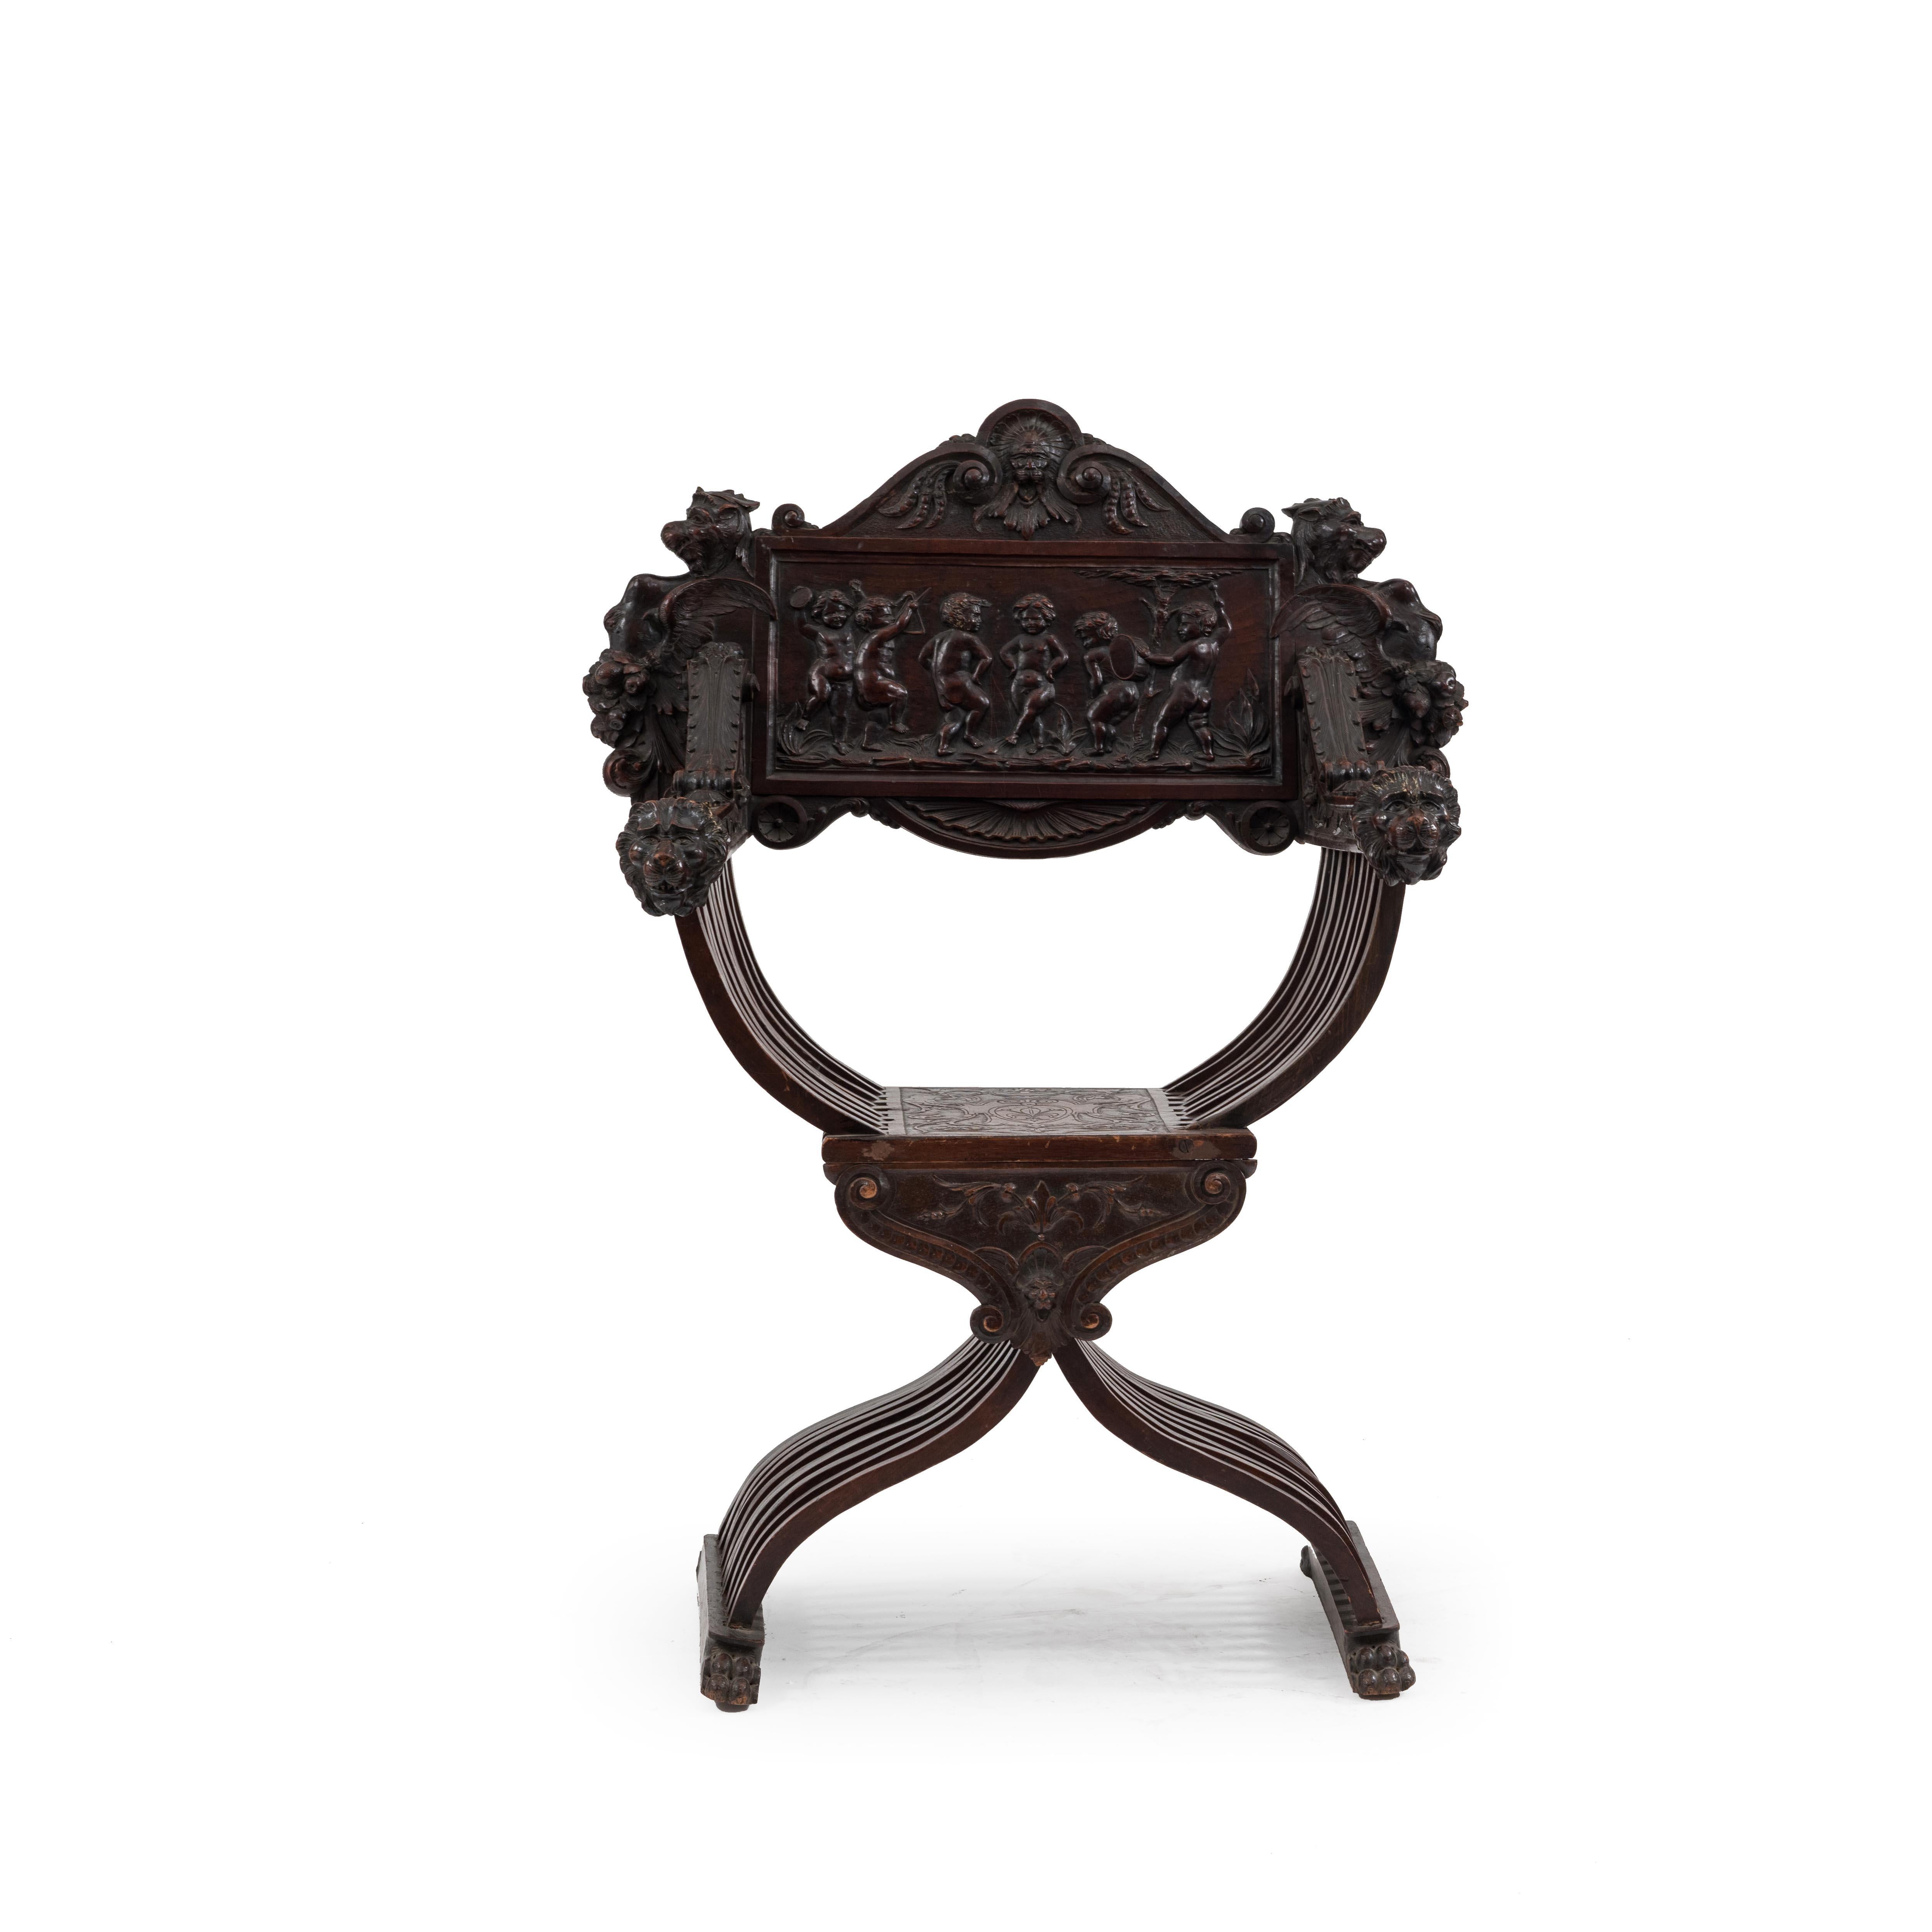 Italian Renaissance Savonarola style walnut armchair with cupids on back and lion carved arms (19th century).
  